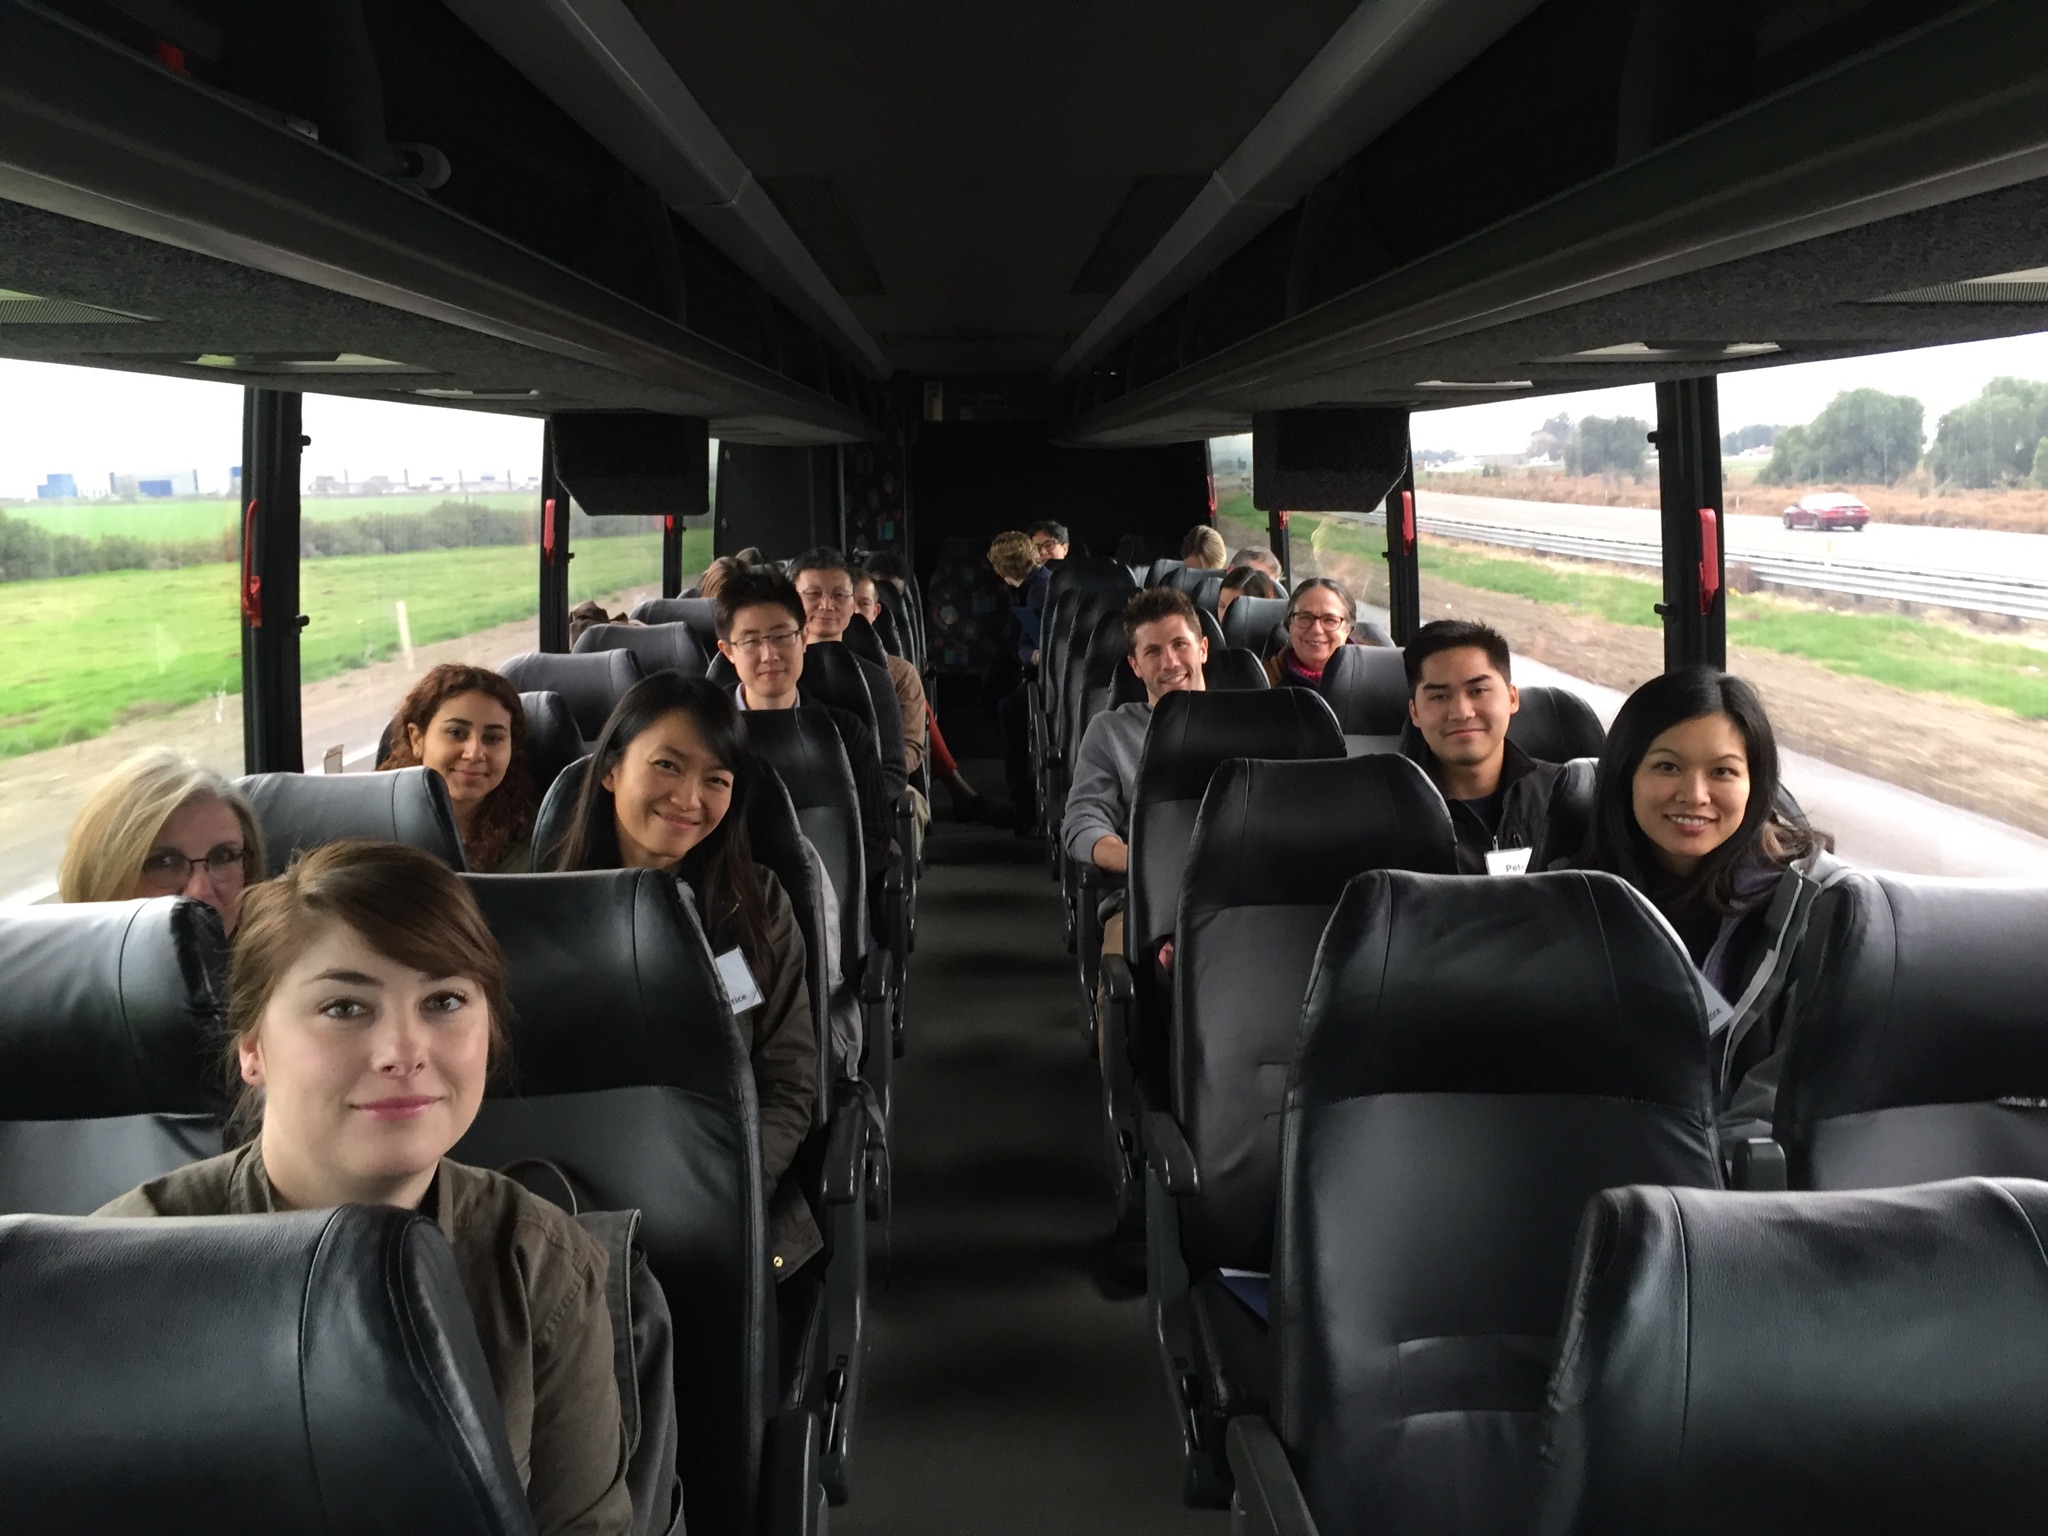 Photo: Morrison & Foerster LLP and Yahoo Inc. volunteer attorneys aboard the Justice Bus to Modesto, California.